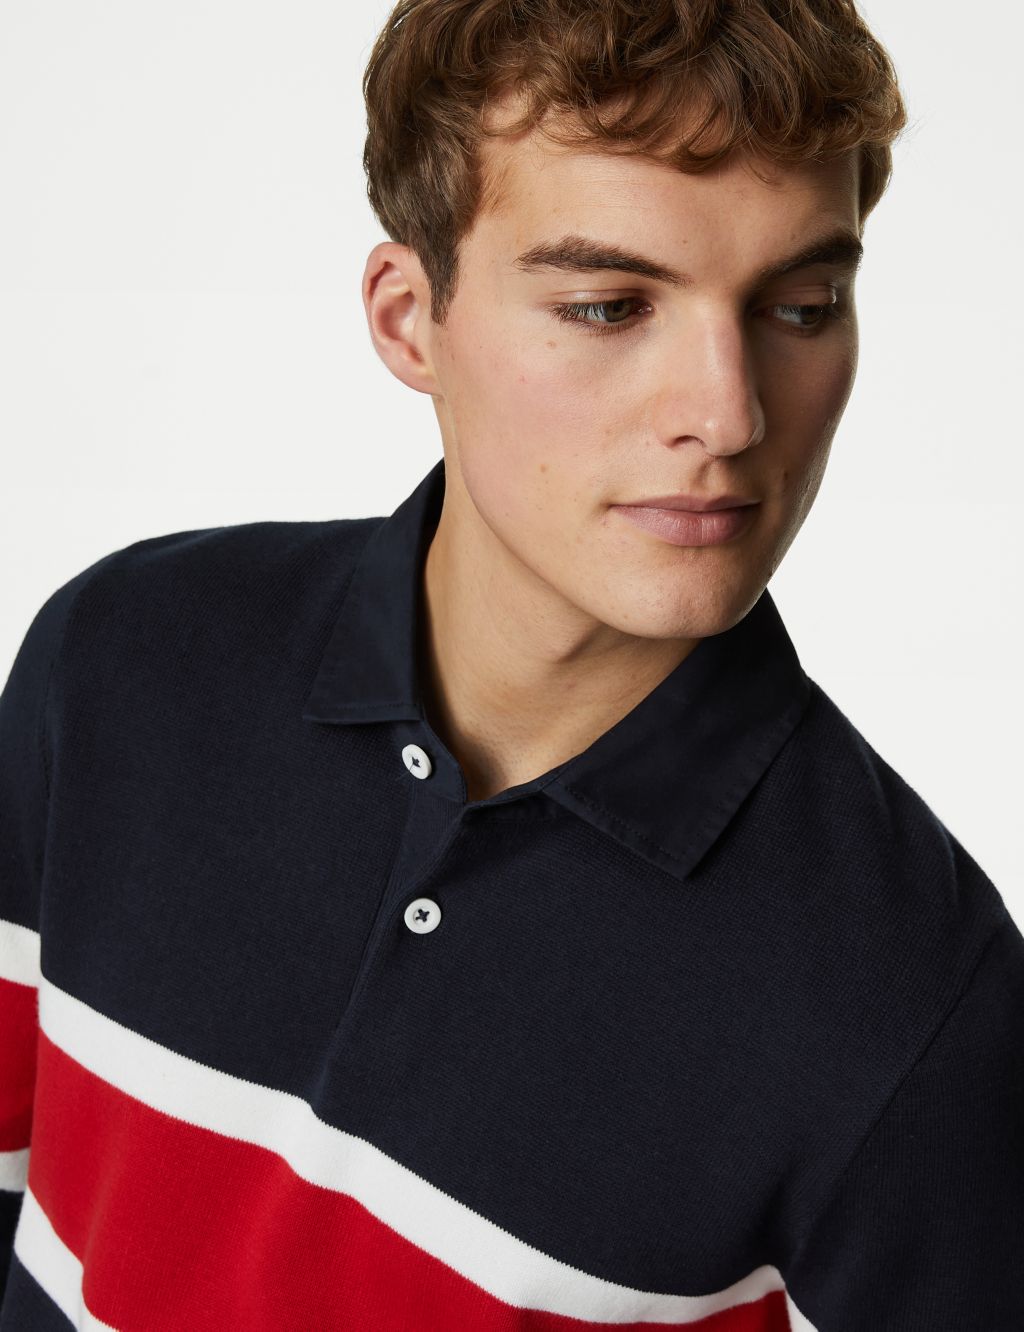 Men's Rugby Shirts | M&S